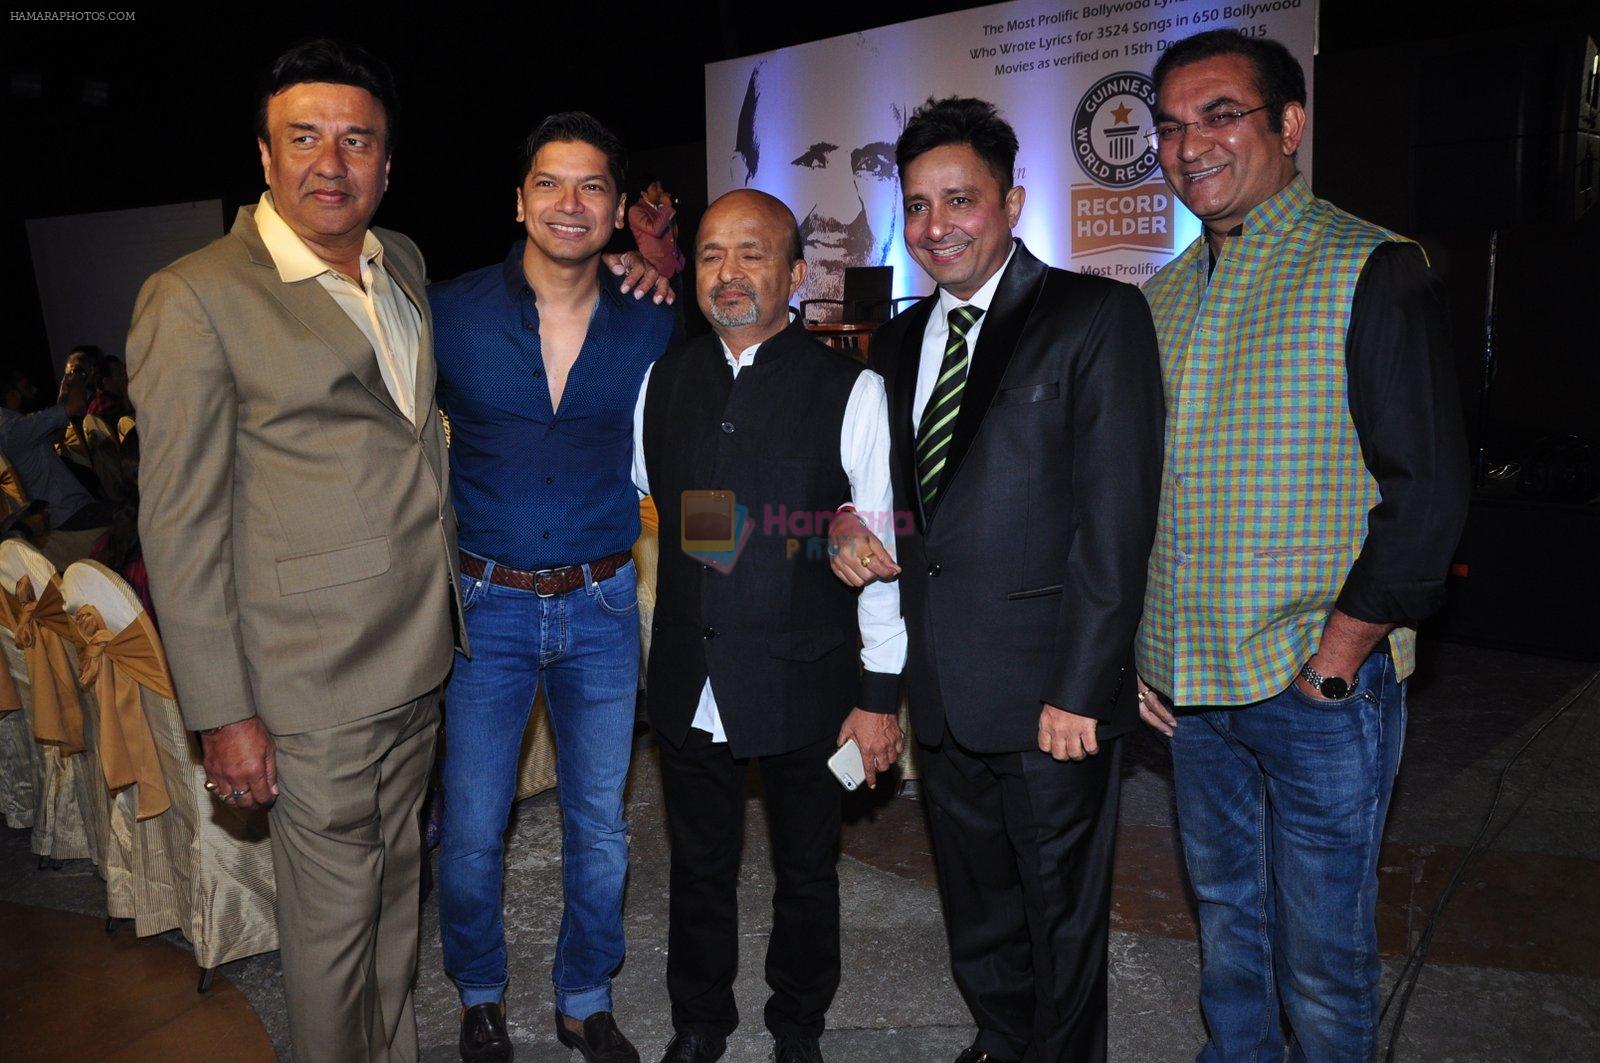 Anu Malik, Shaan, Sukhwinder Singh, Abhijeet Bhattacharya at Sameer in Guinness book of records bash with music fraternity on 15th Feb 2016